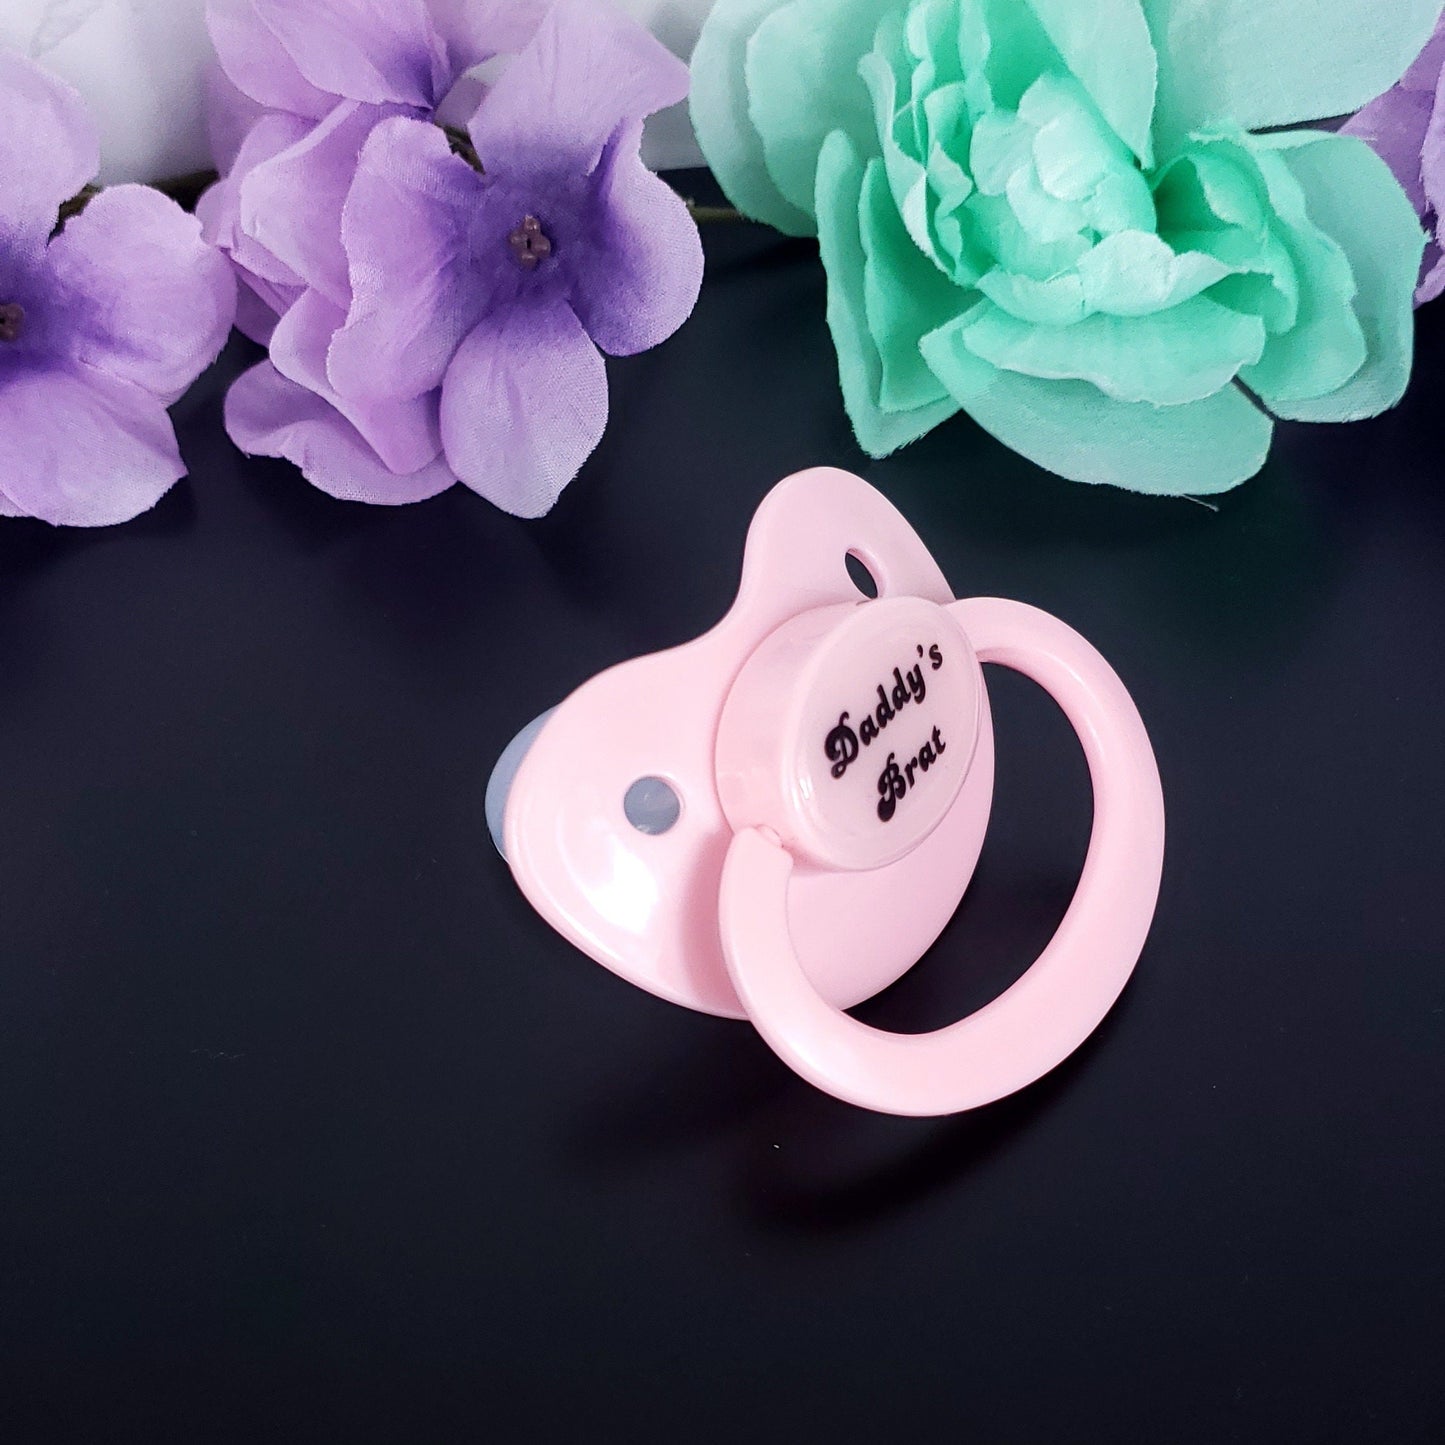 Daddy's Brat Adult Pacifier